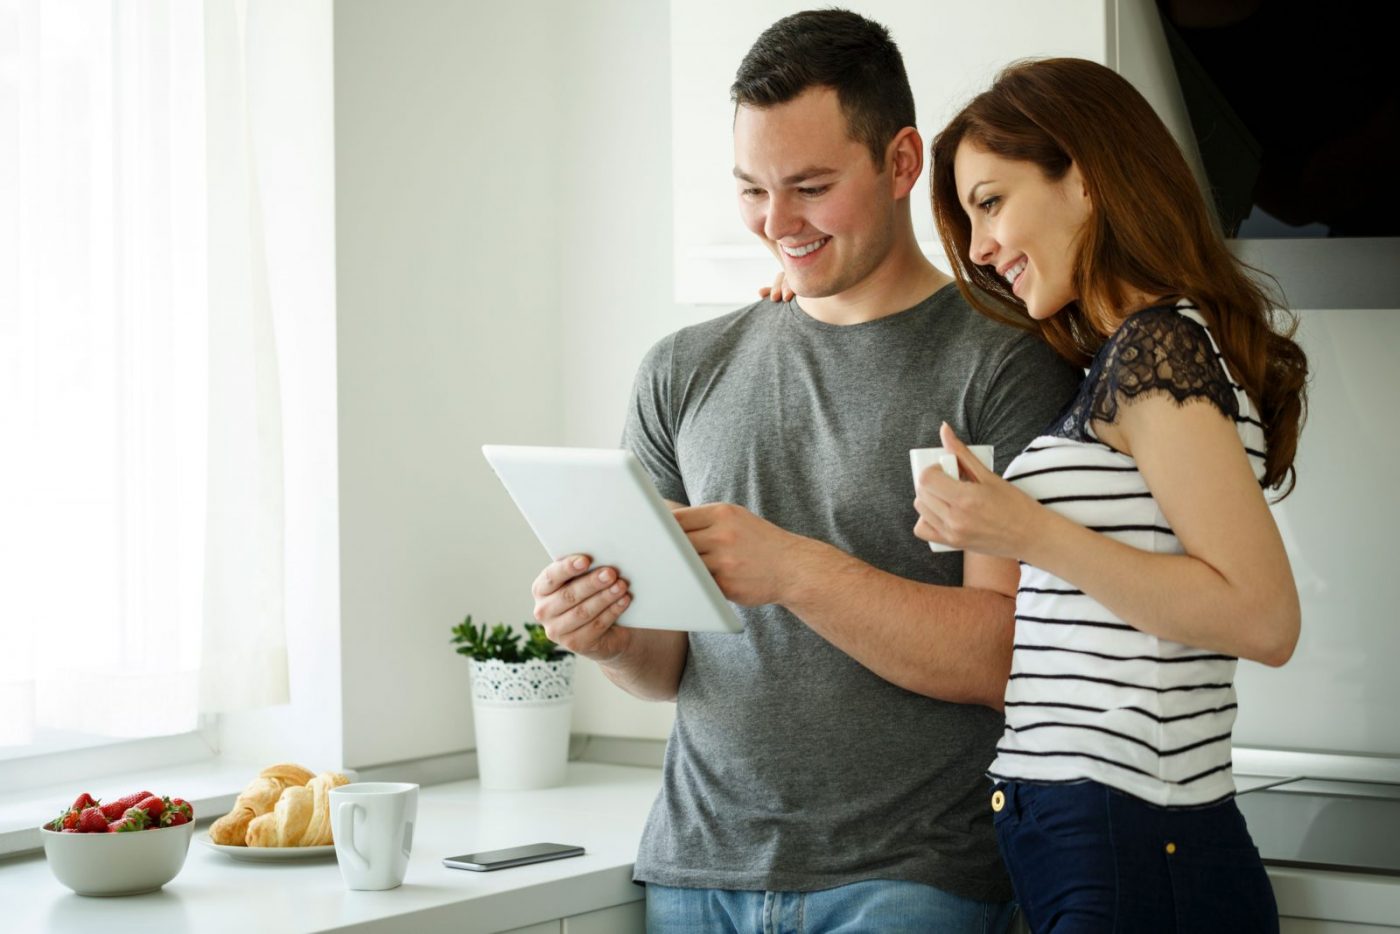 Male and female stood in a domestic kitchen setting, smiling as they drink from mugs and look at something on an ipad